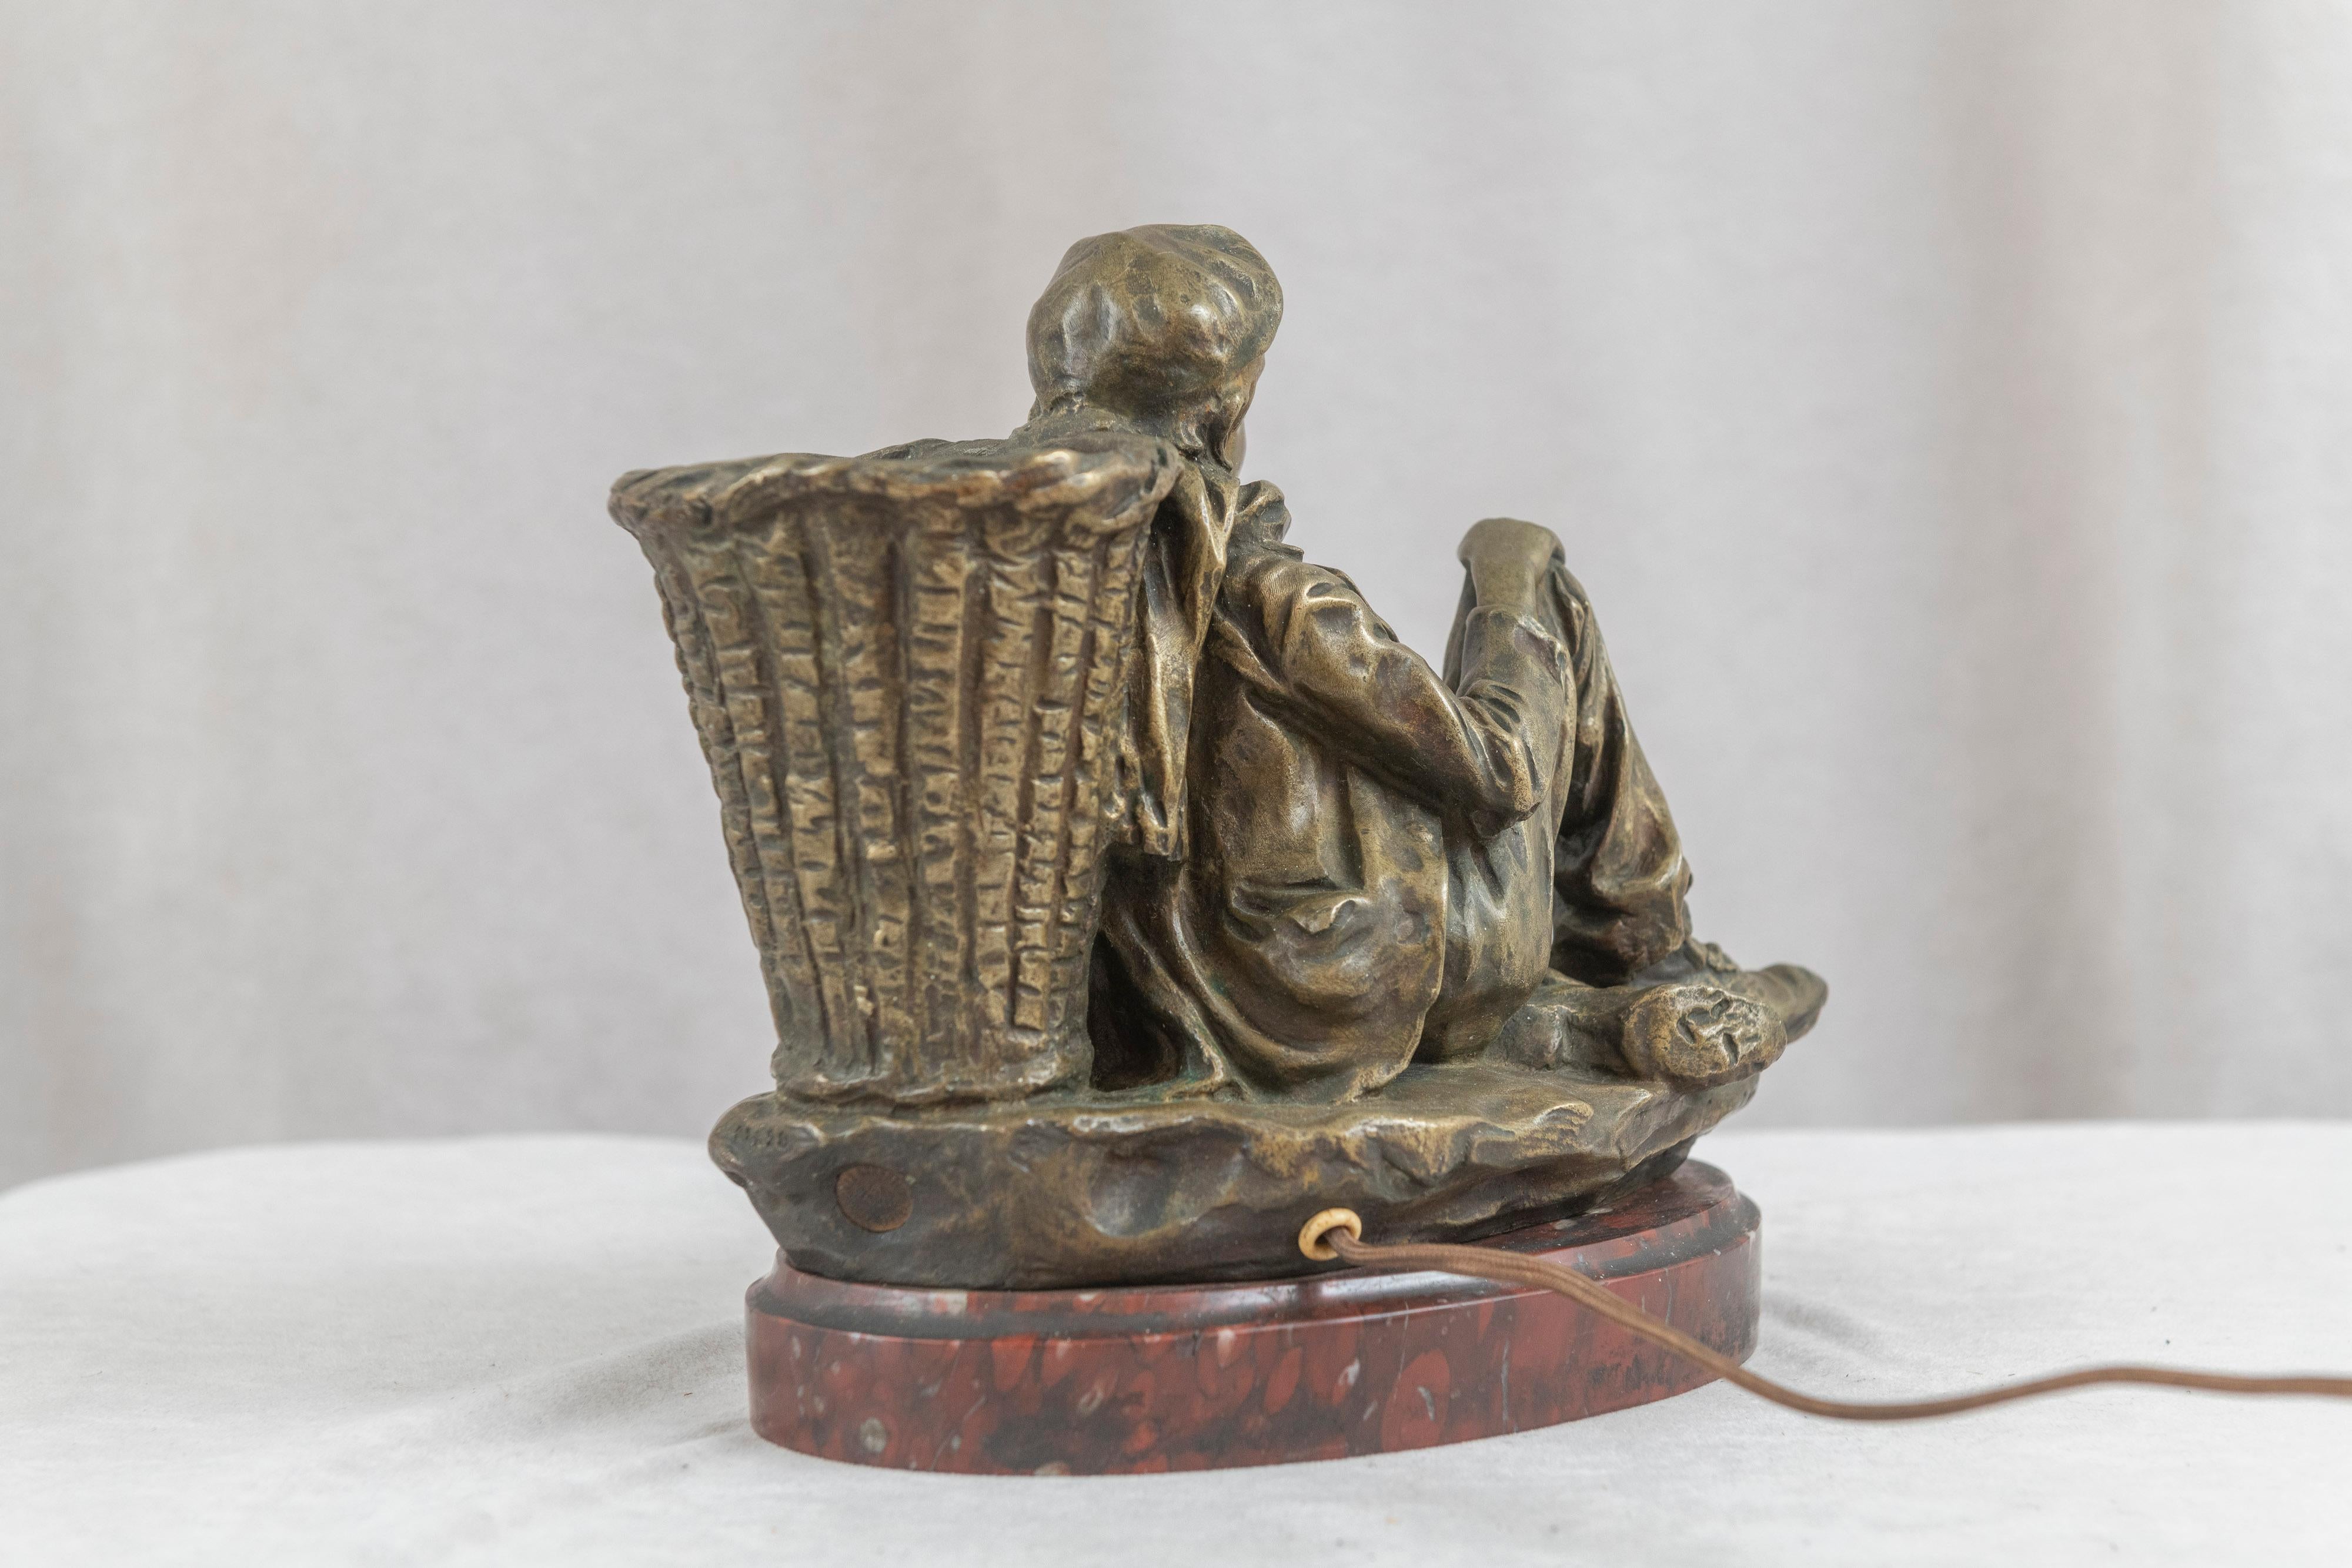 Belle Époque French Bronze of a Seated Boy w/ Lit Lantern, Signed J. Cardona '1878-1923' For Sale